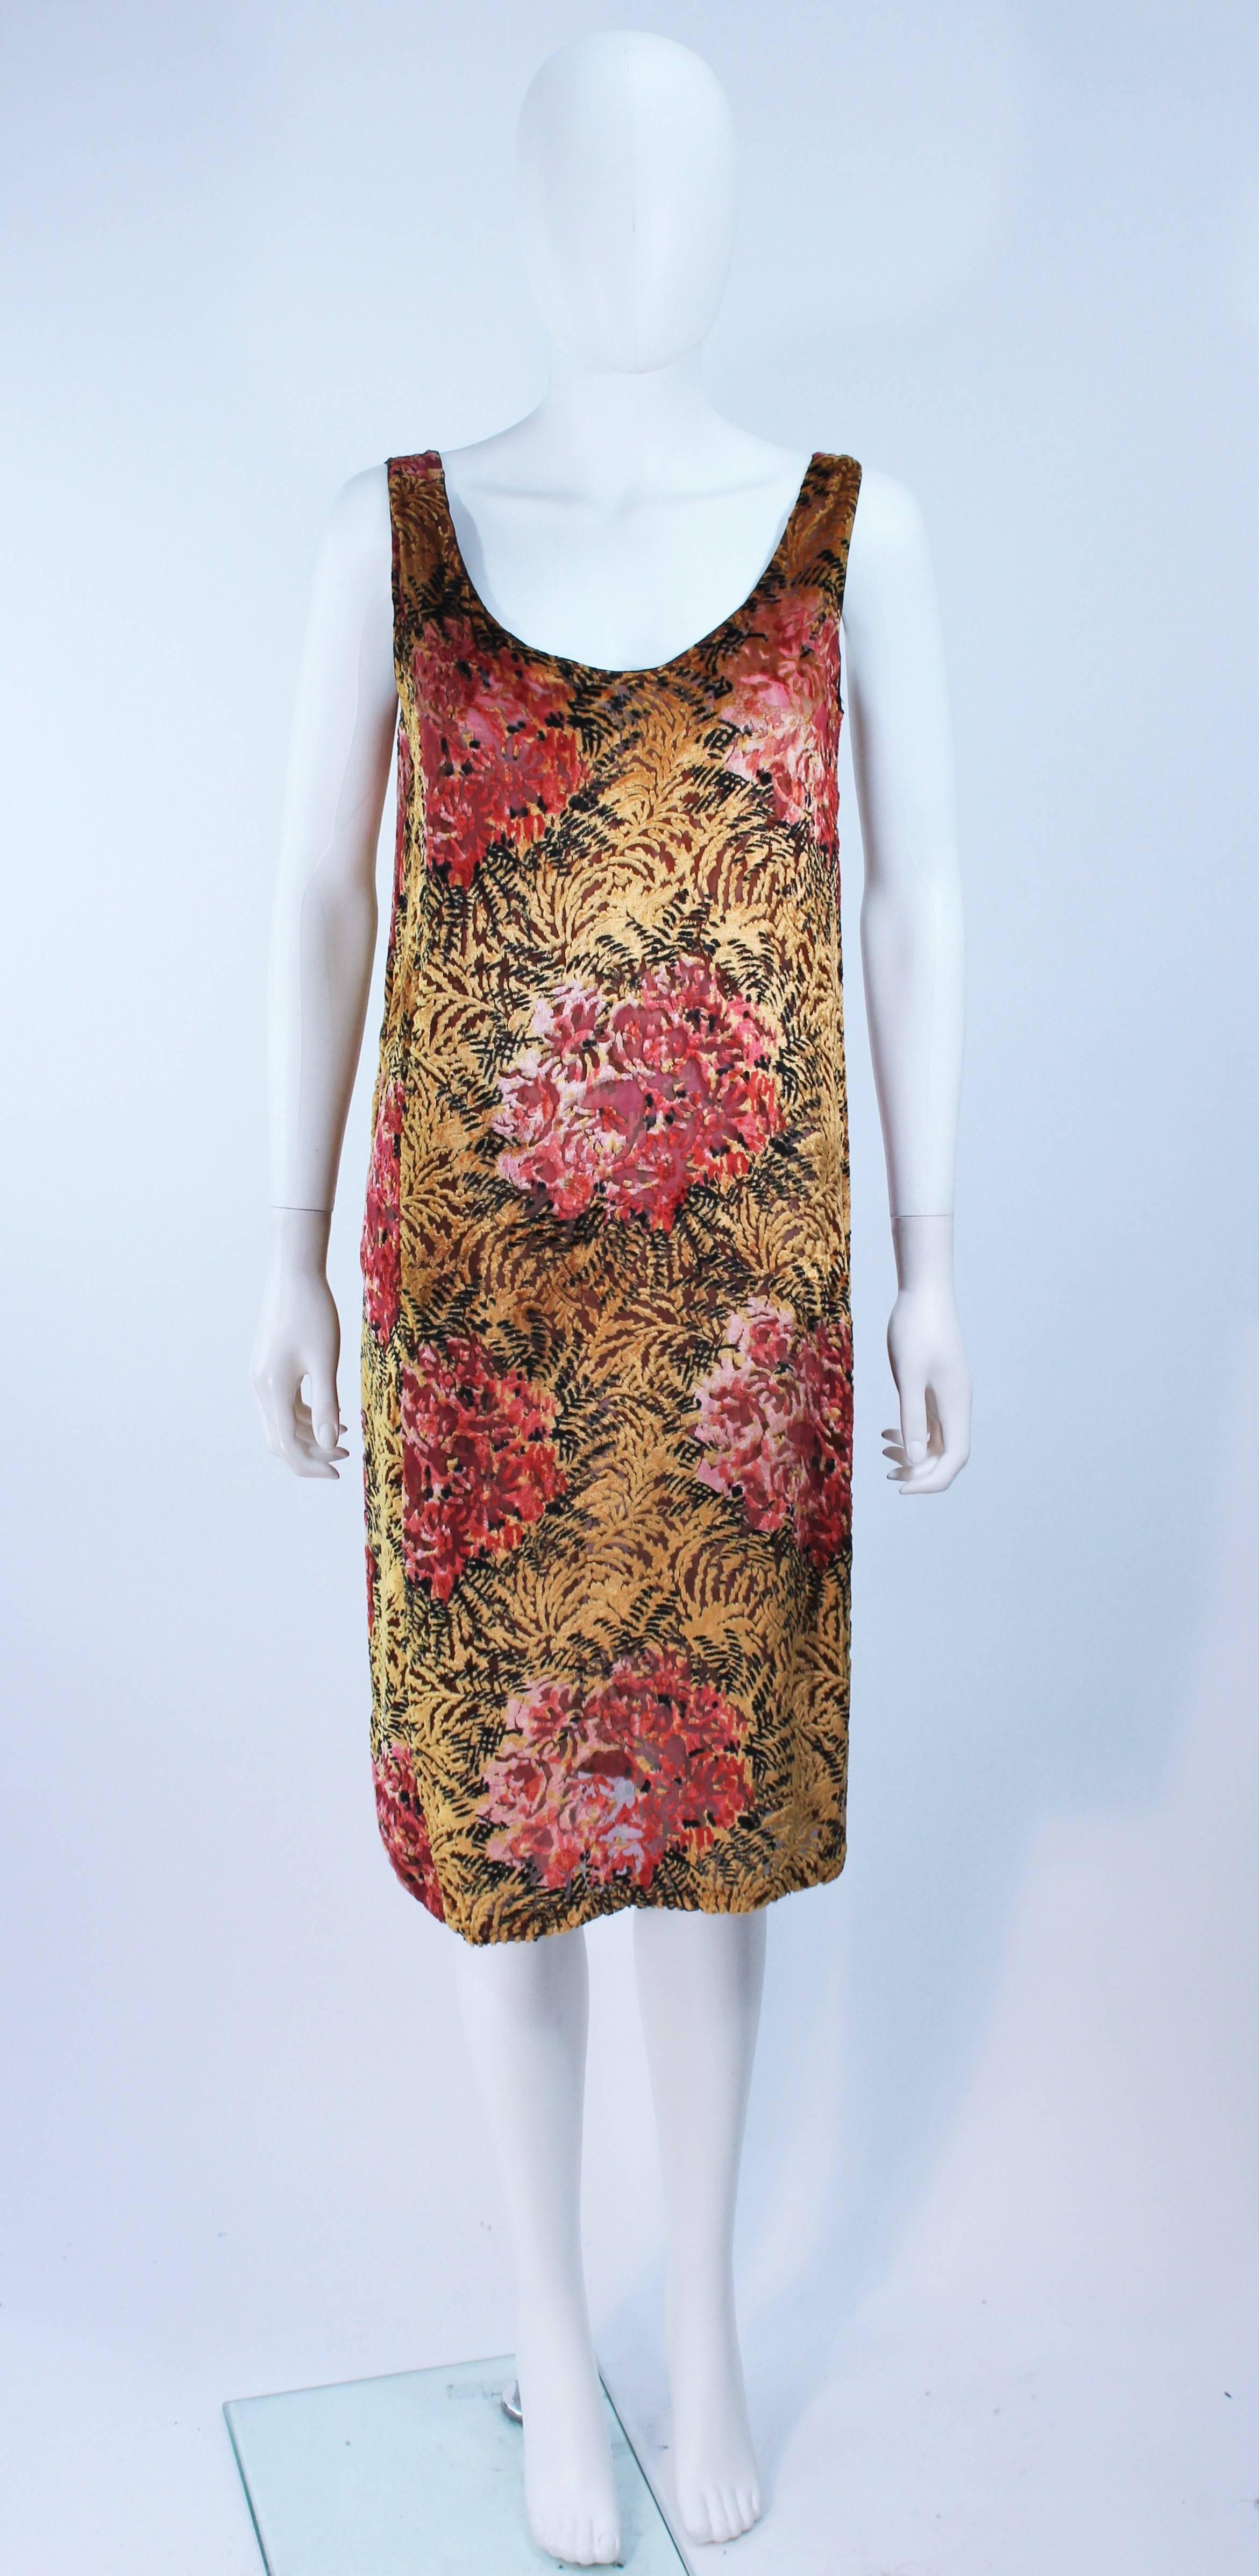 This custom 1940's design is composed of a orange hue floral patterned velvet. Handmade. In excellent vintage condition.

**Please cross-reference measurements for personal accuracy. Size in description box is an estimation.

Measures